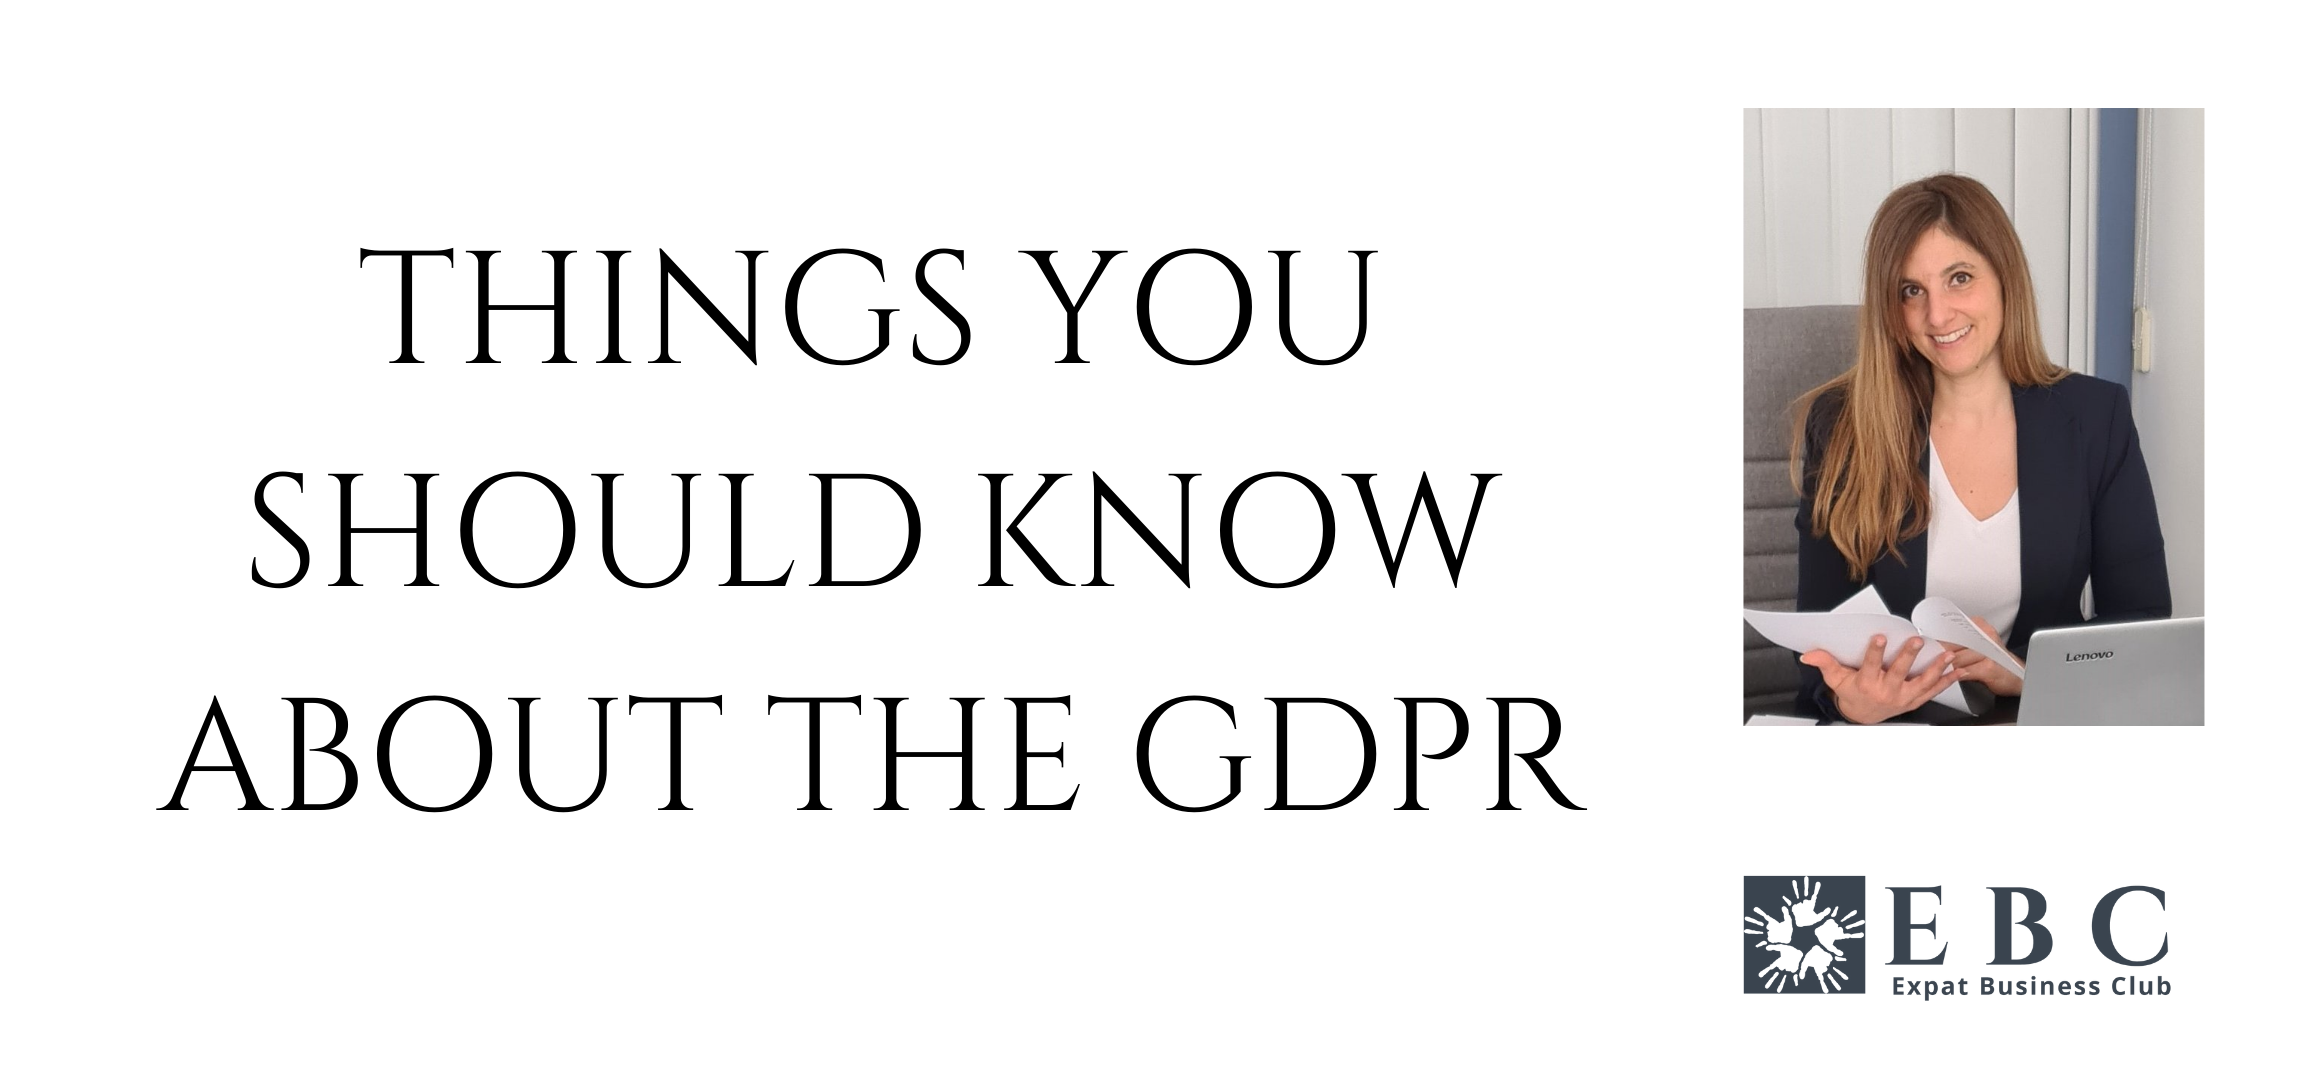 Things you should know about the GDPR